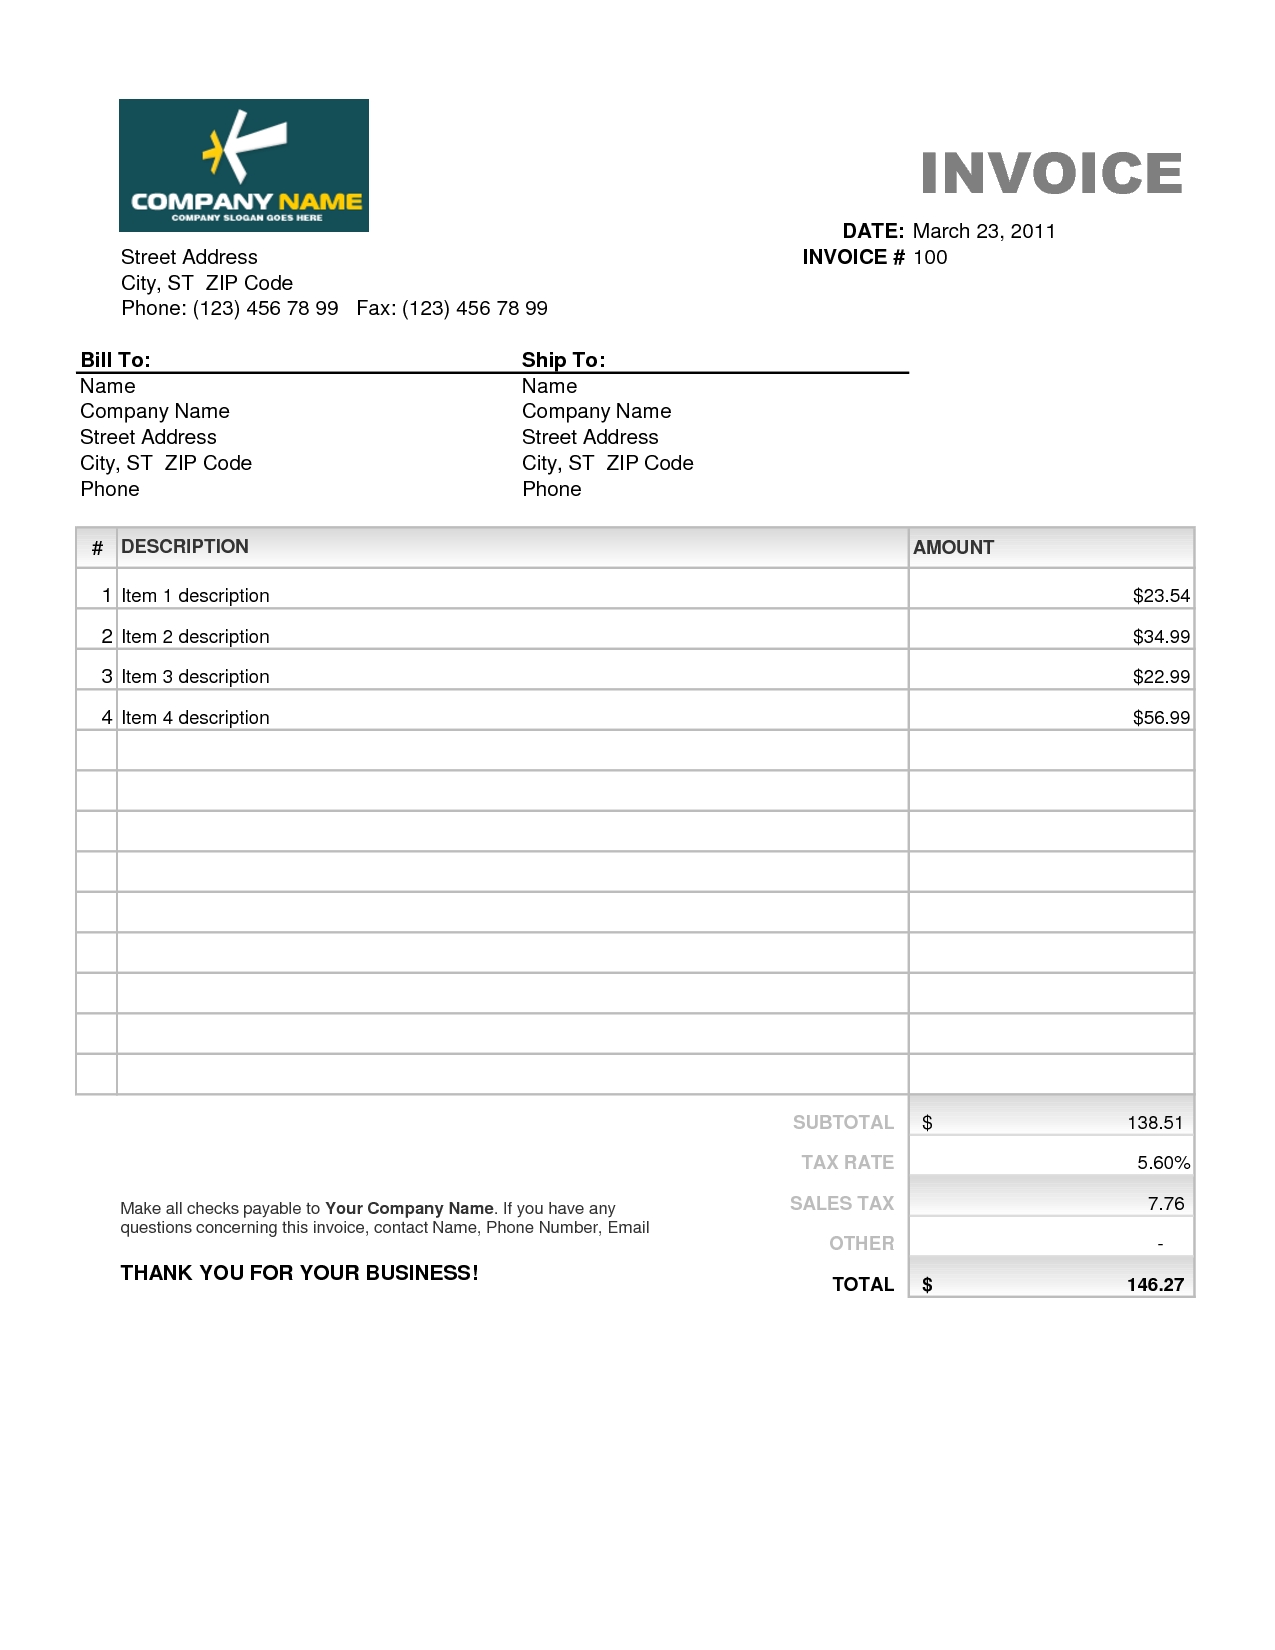 invoice form free sample recommendation letter from employer for invoice excel sheet